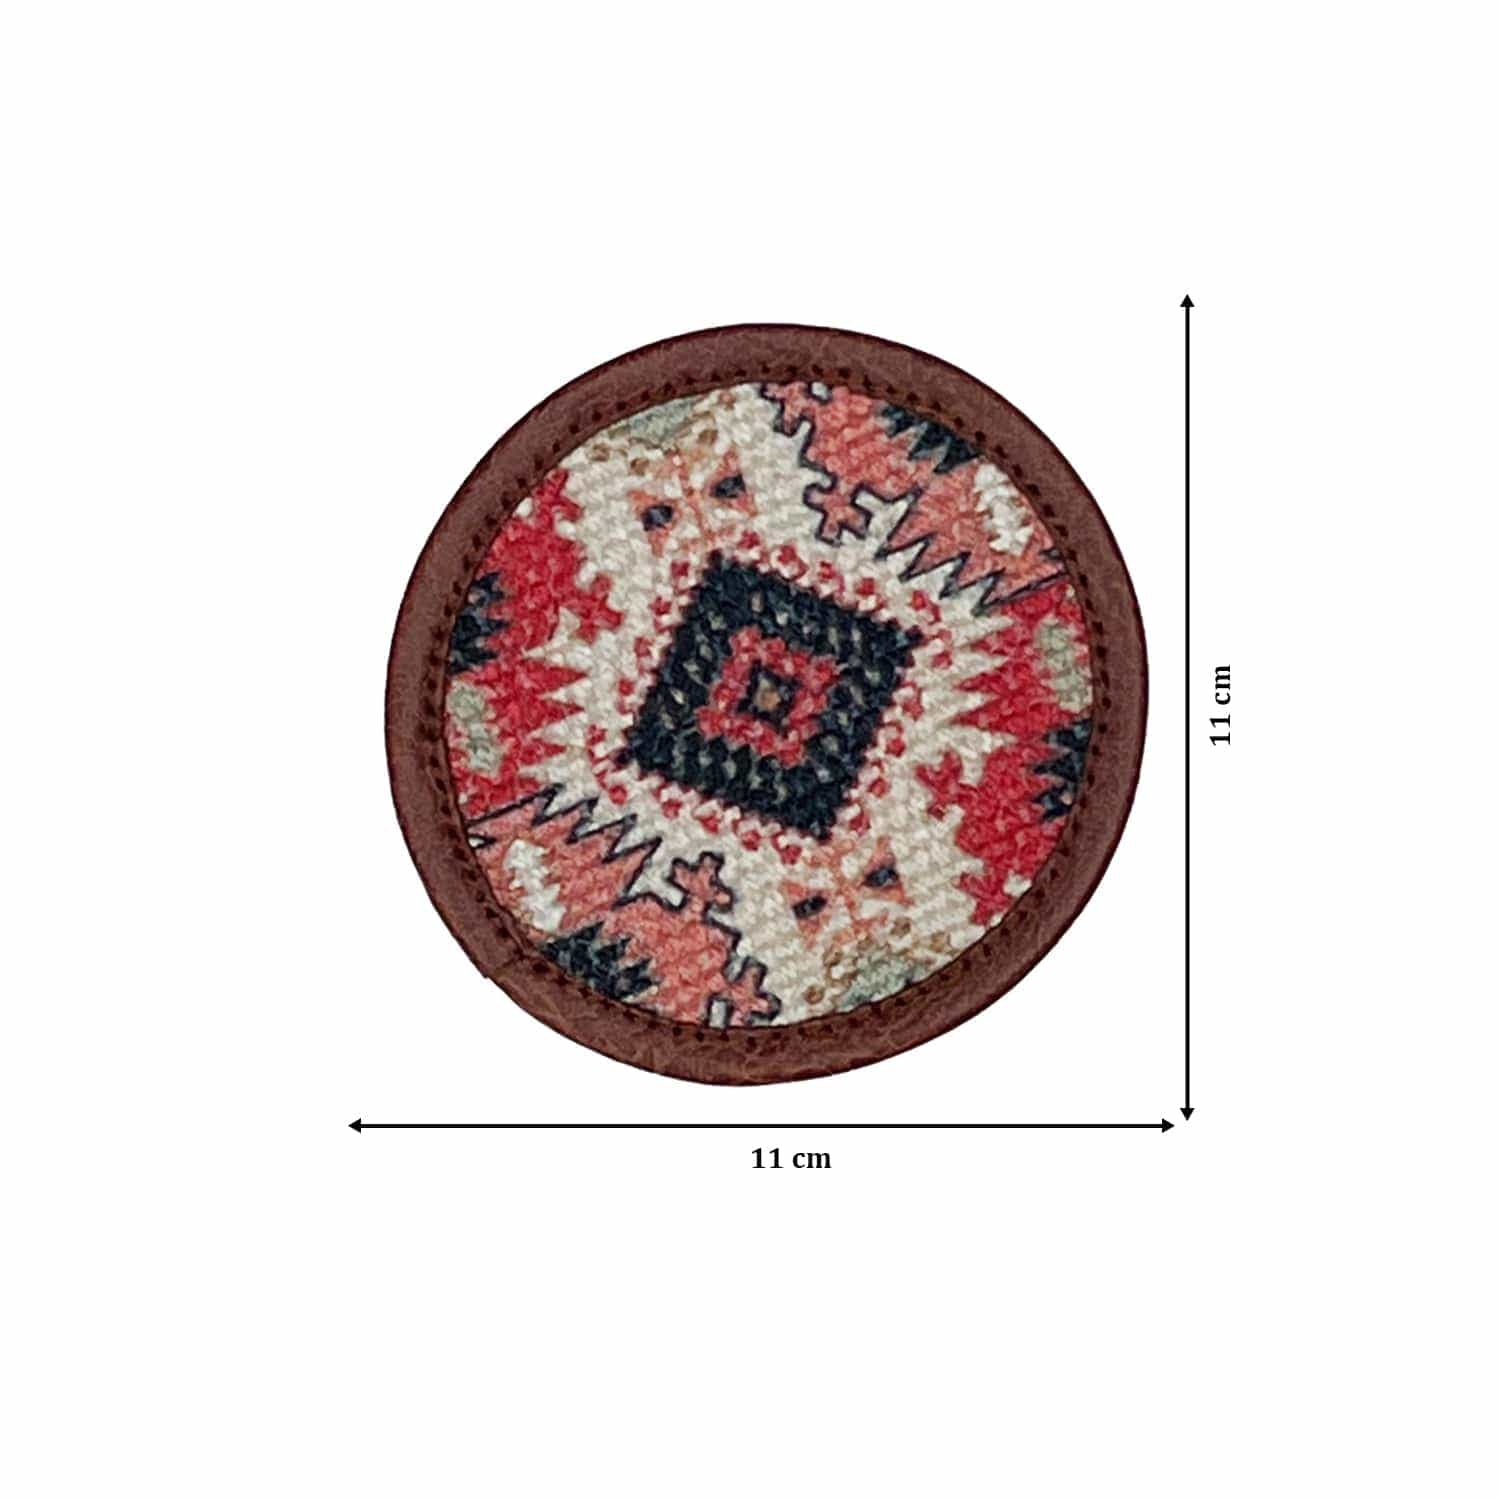 Mona-B Coaster Mona B Set of 4 Printed Coasters, 4.5 INCH Round, Best for Bed-Side Table/Center Table, Dining Table - PC-112